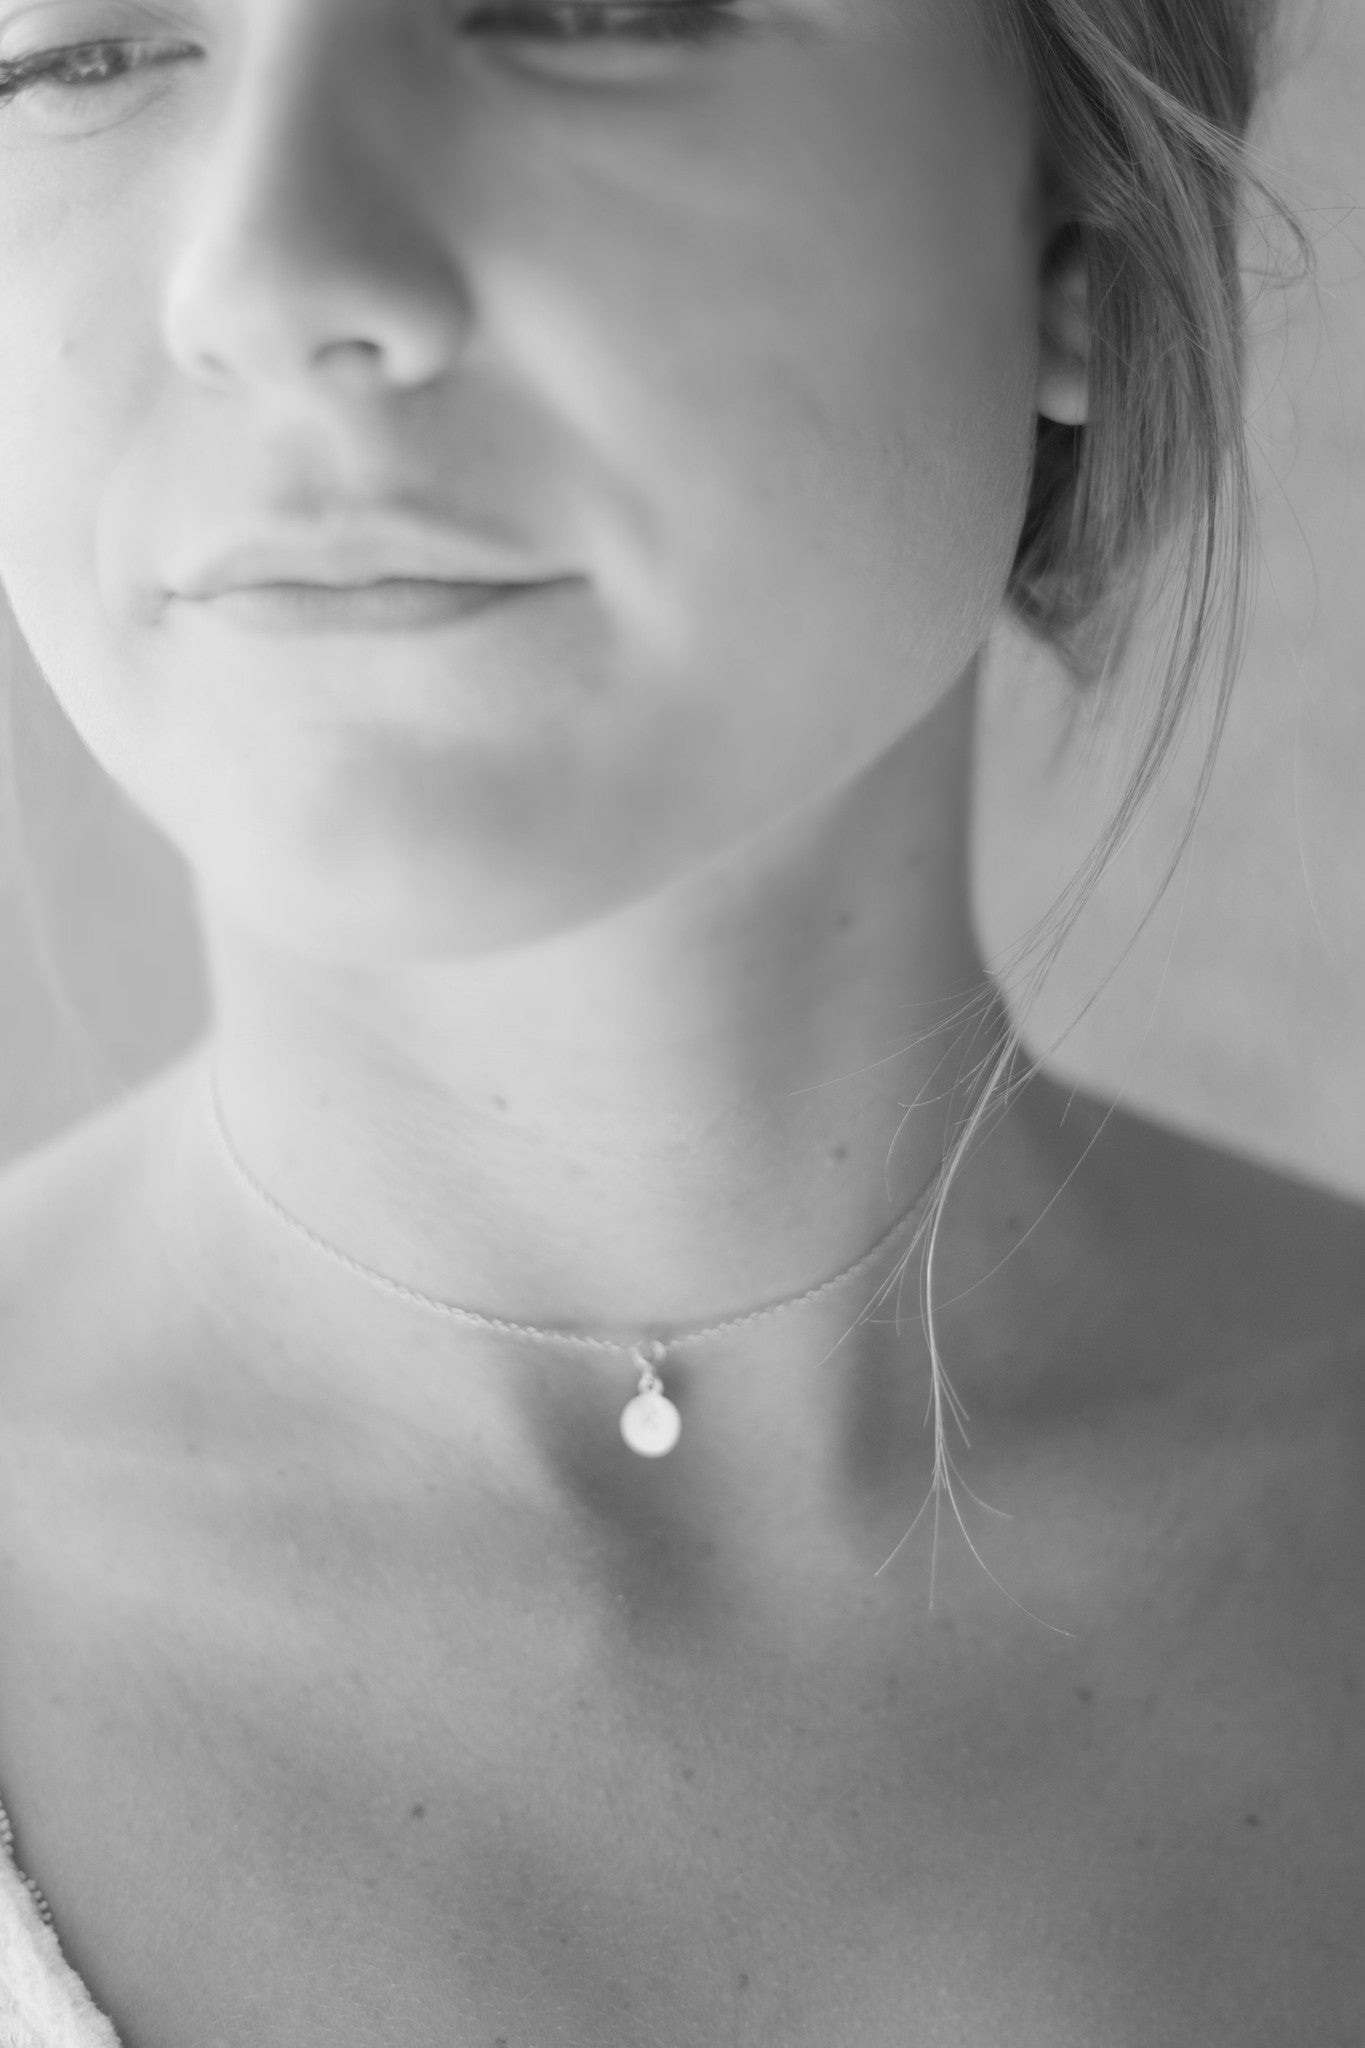 Tiny Initial Choker Necklace